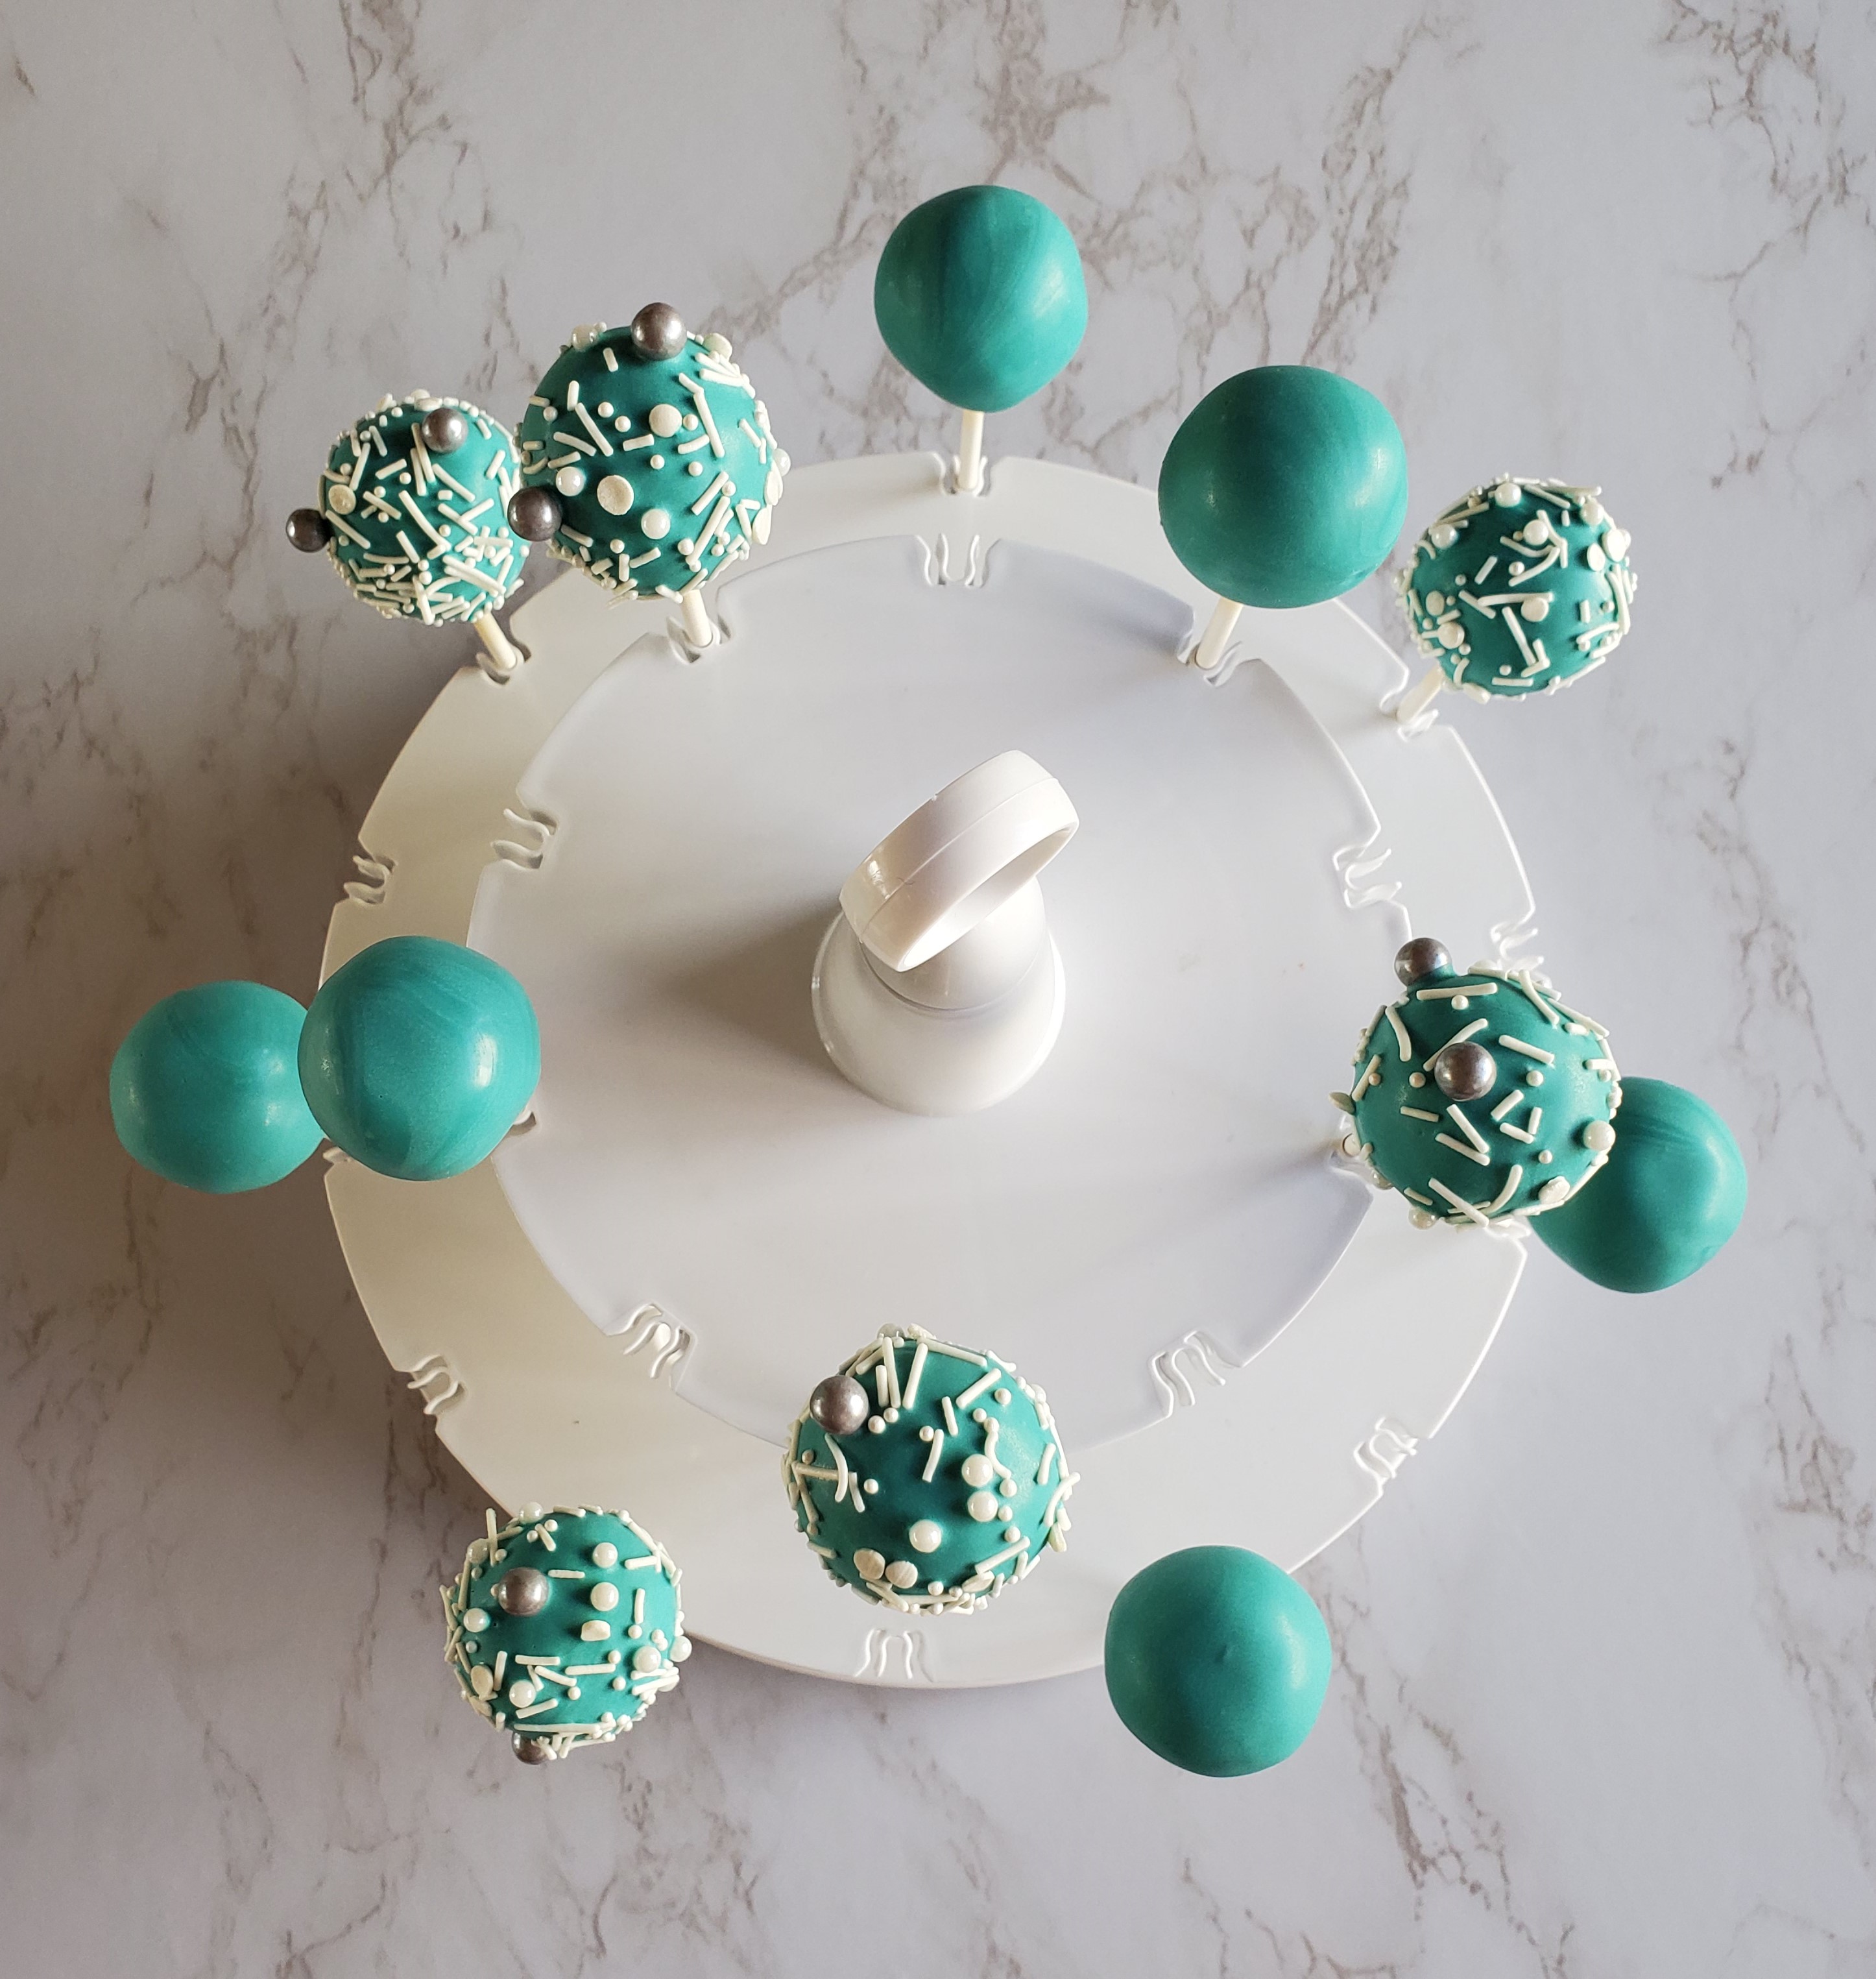 Turquoise cake pops with white and shiny round, gray sprinkles in front of a marble background in a cake pop stand.